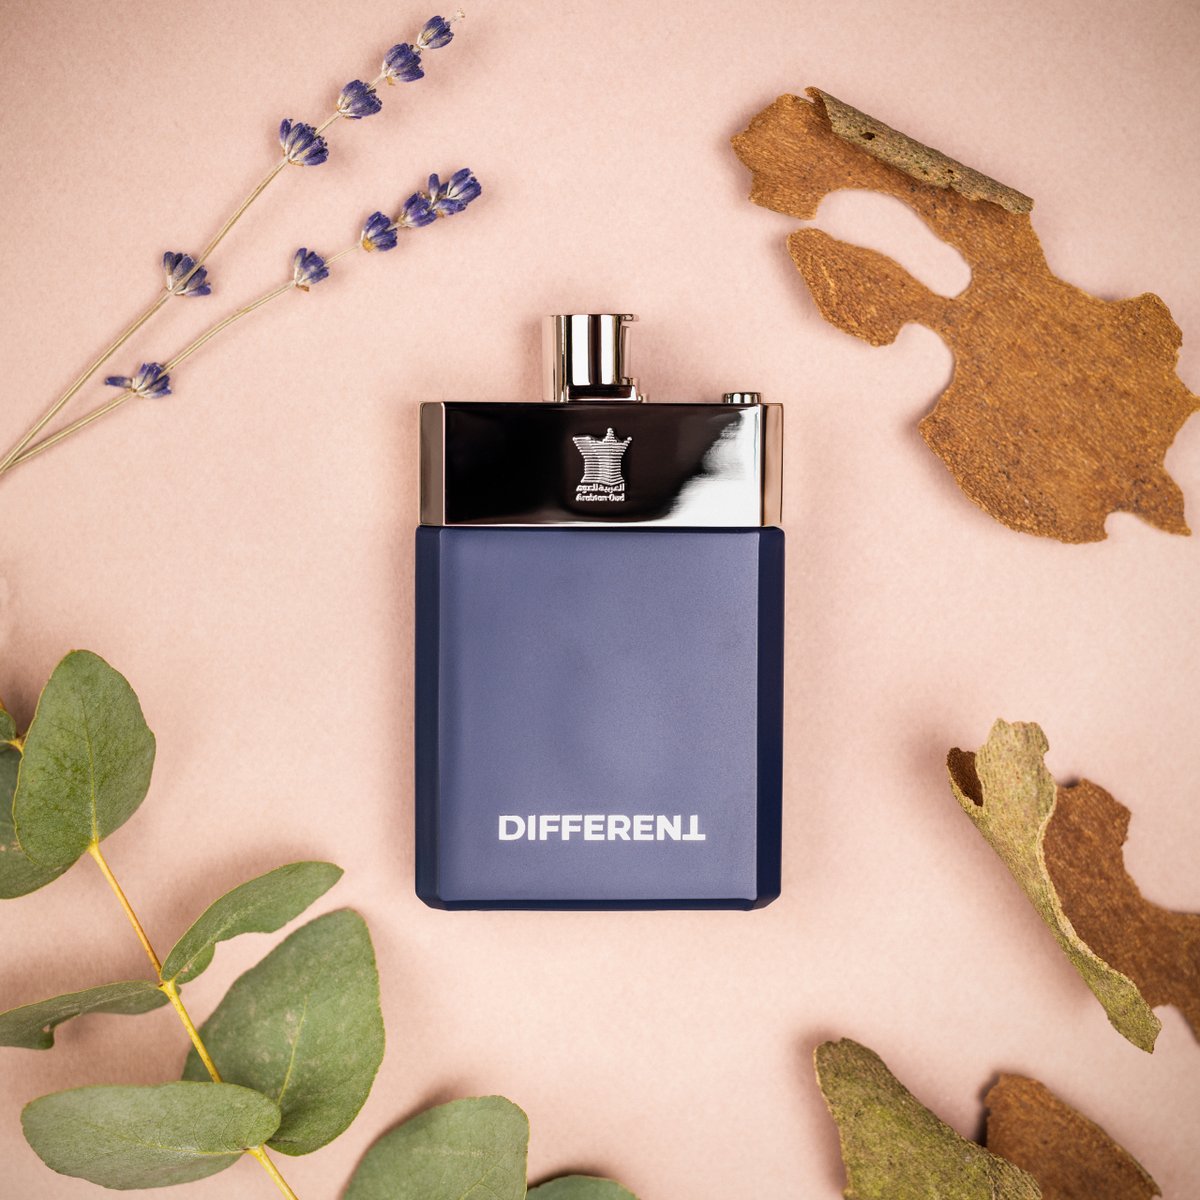 Different finishes with a deep note of patchouli, leaving a trail as distinct and memorable as the wearer’s own signature. #Frangrance #fragranceaddict #spring #springfragranceforhim #forhim